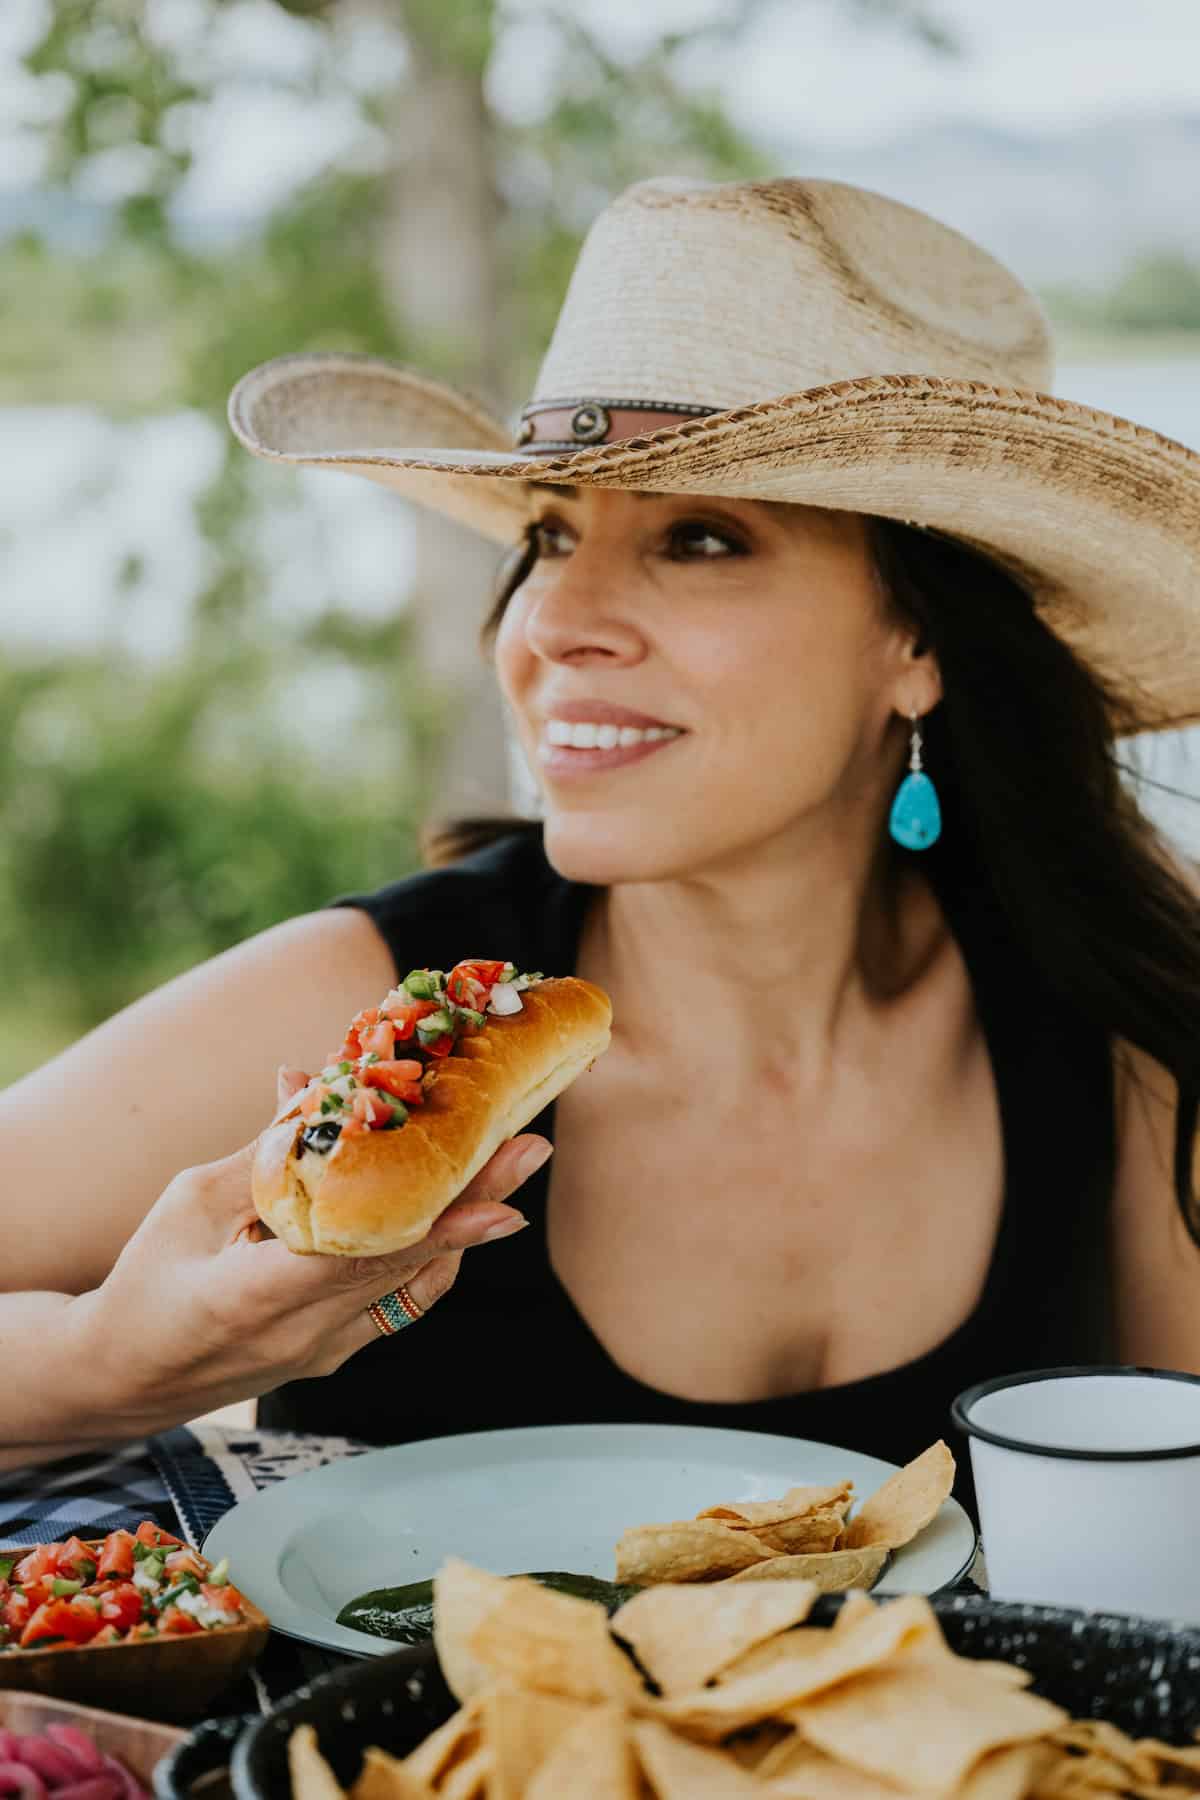 Yvette Marquez, author of Muy Bueno, wearing a cowboy hat, turquoise drop earrings, and a black tank top holding a Mexican hot dog with bacon, pico de gallo, and guacamole at a picnic table. 